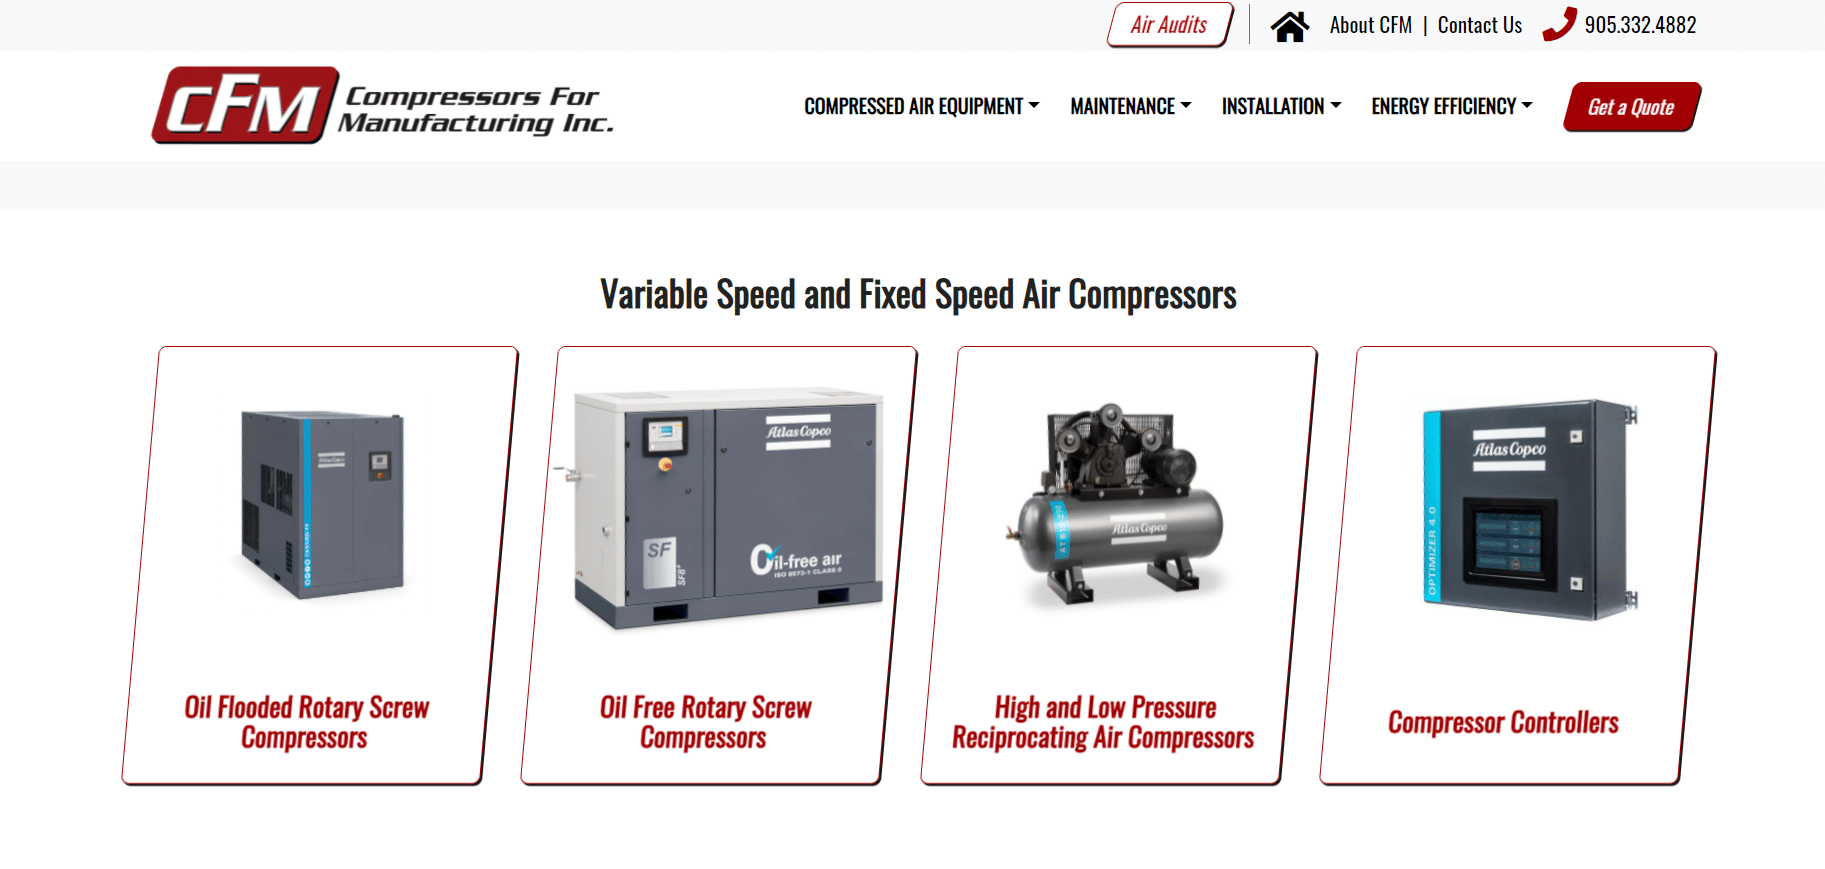 Compressors for Manufacturing